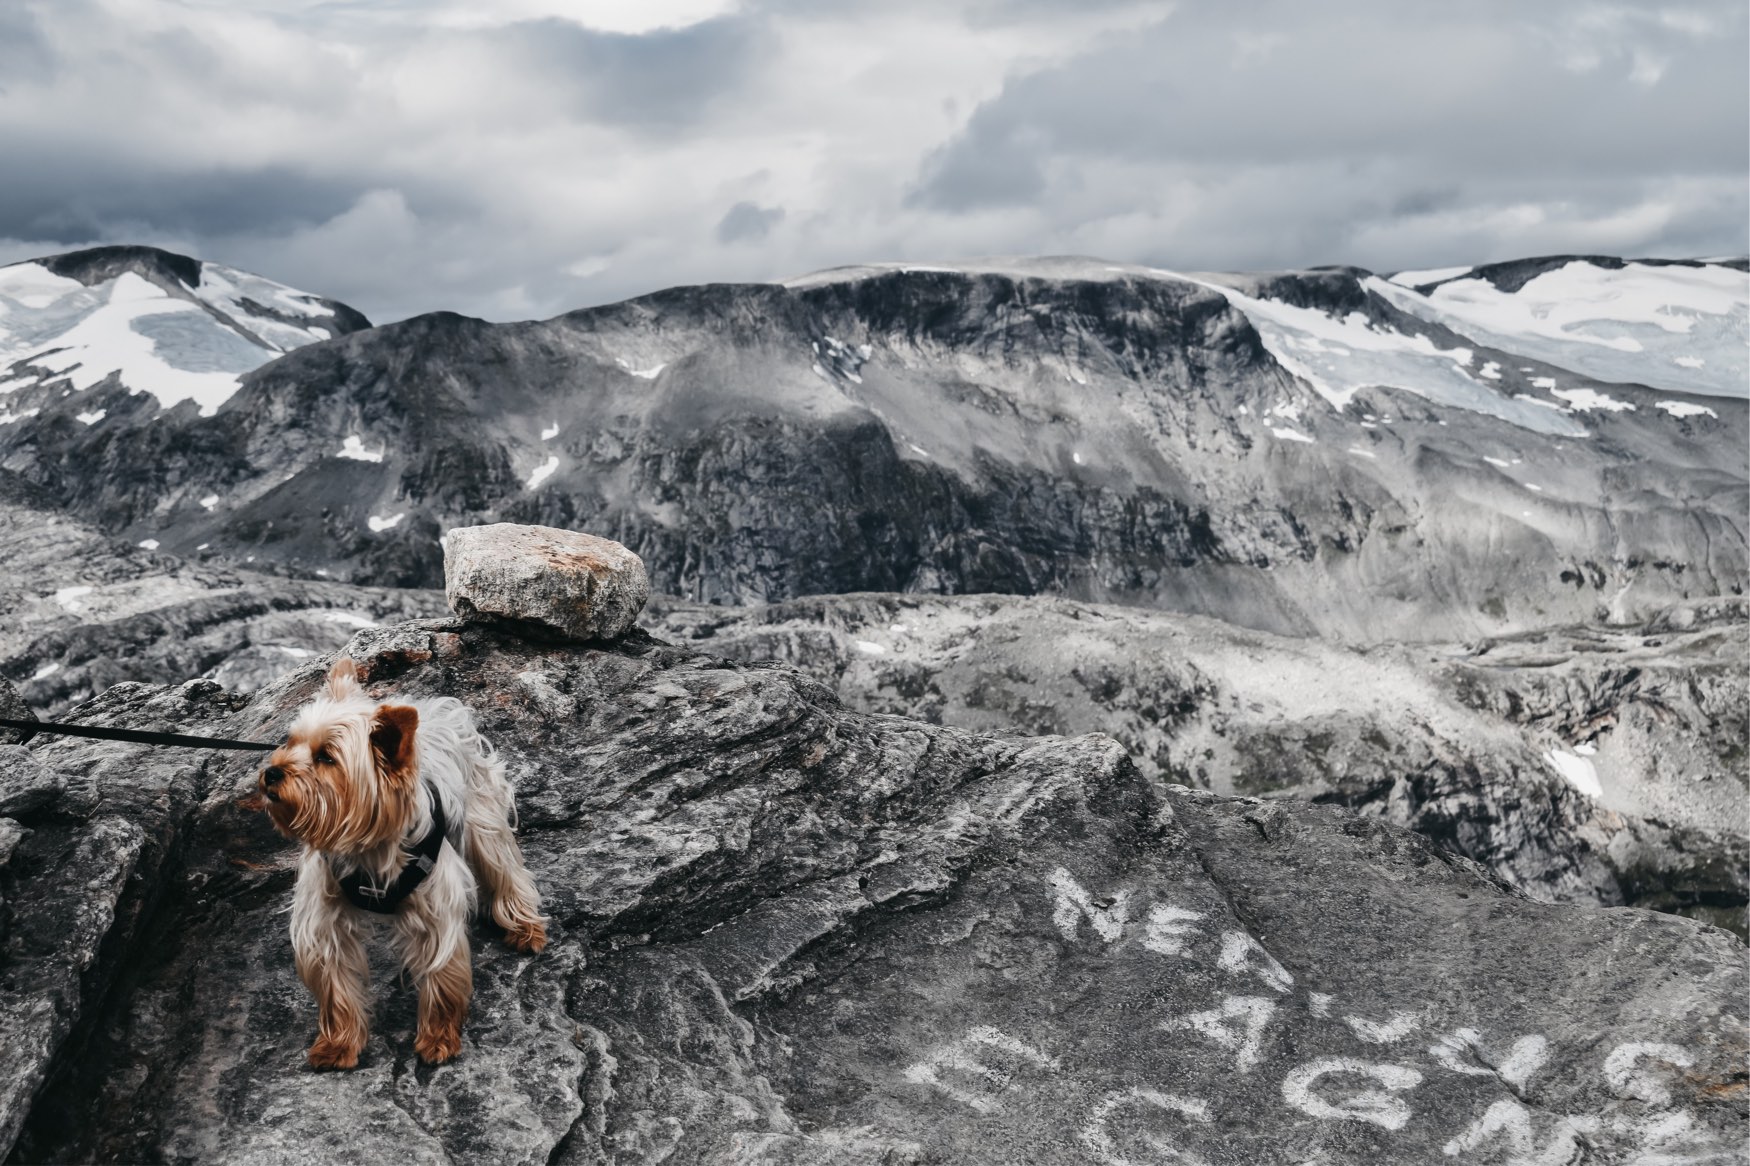 A small dog standing on top of a mountain with other mountains in the background